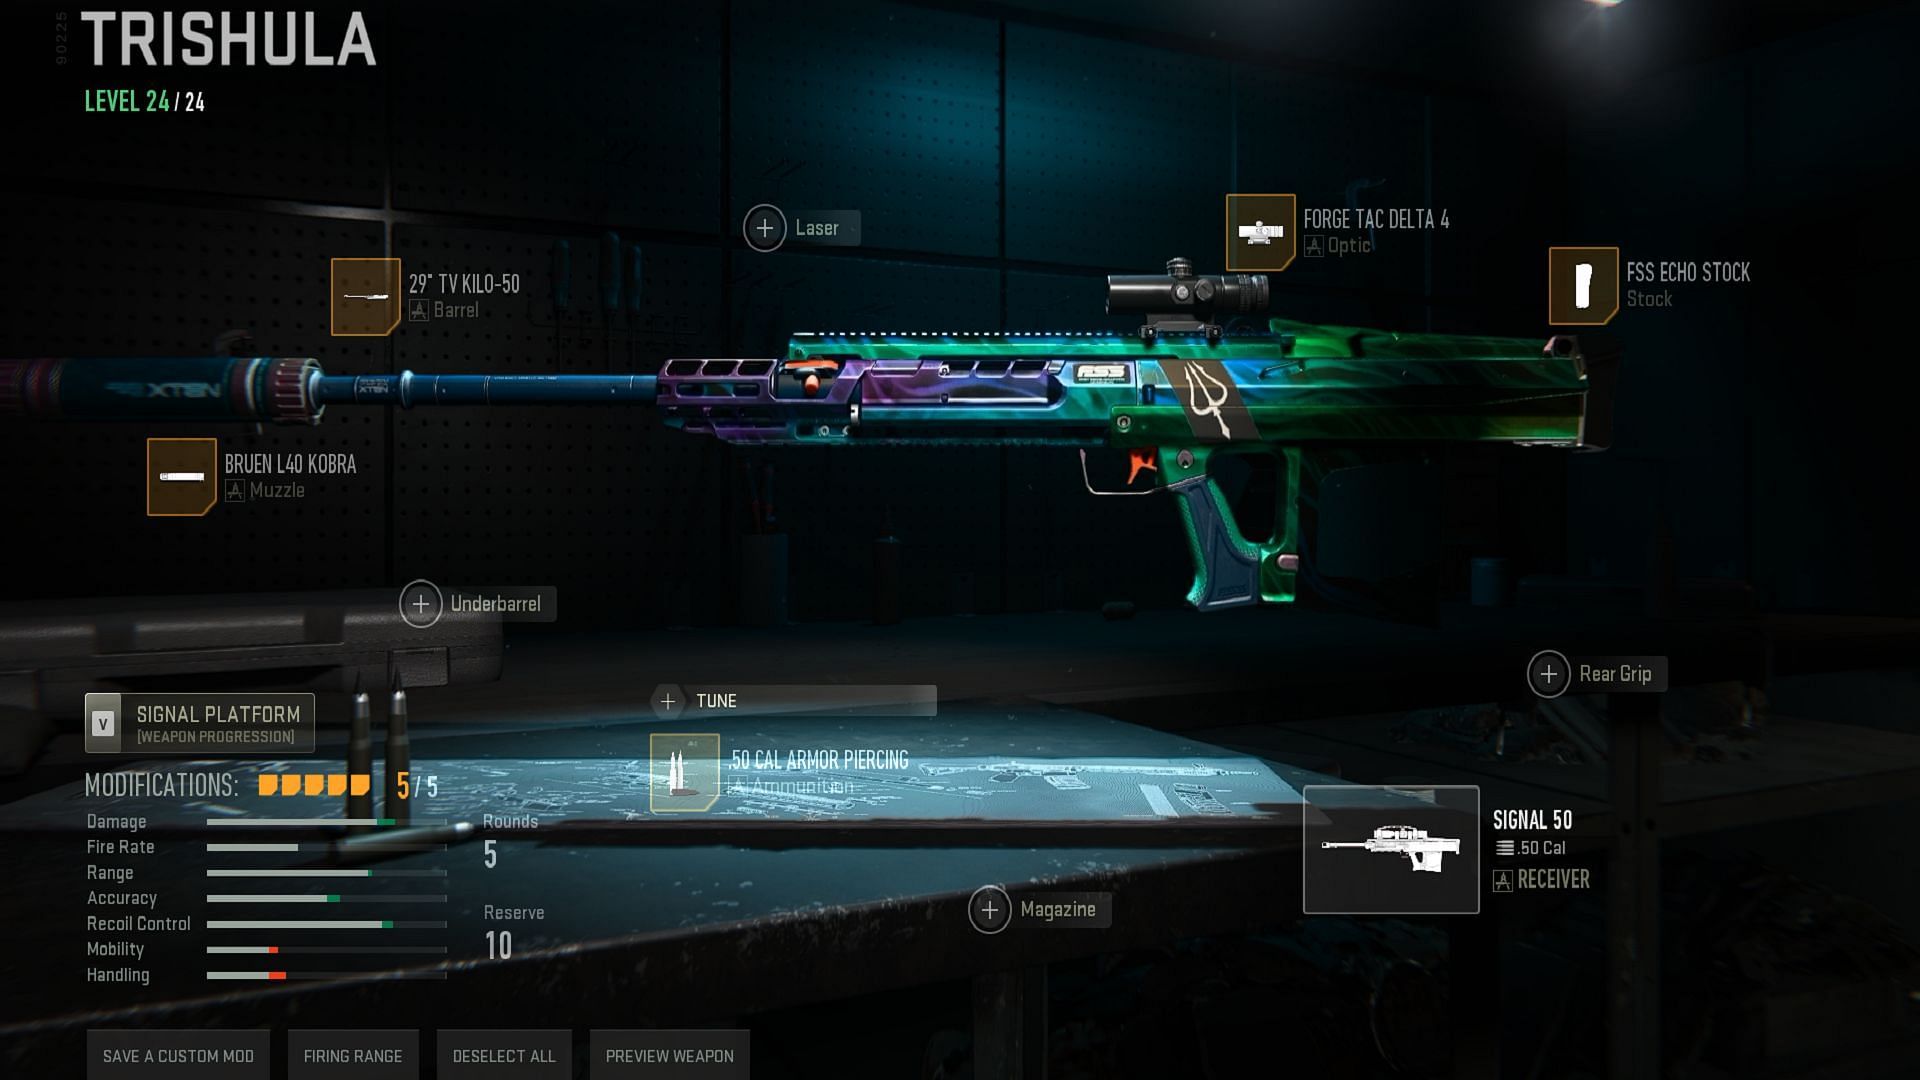 Best Signal 50 loadout for Warzone 2 Ranked Play (Image via Activision)